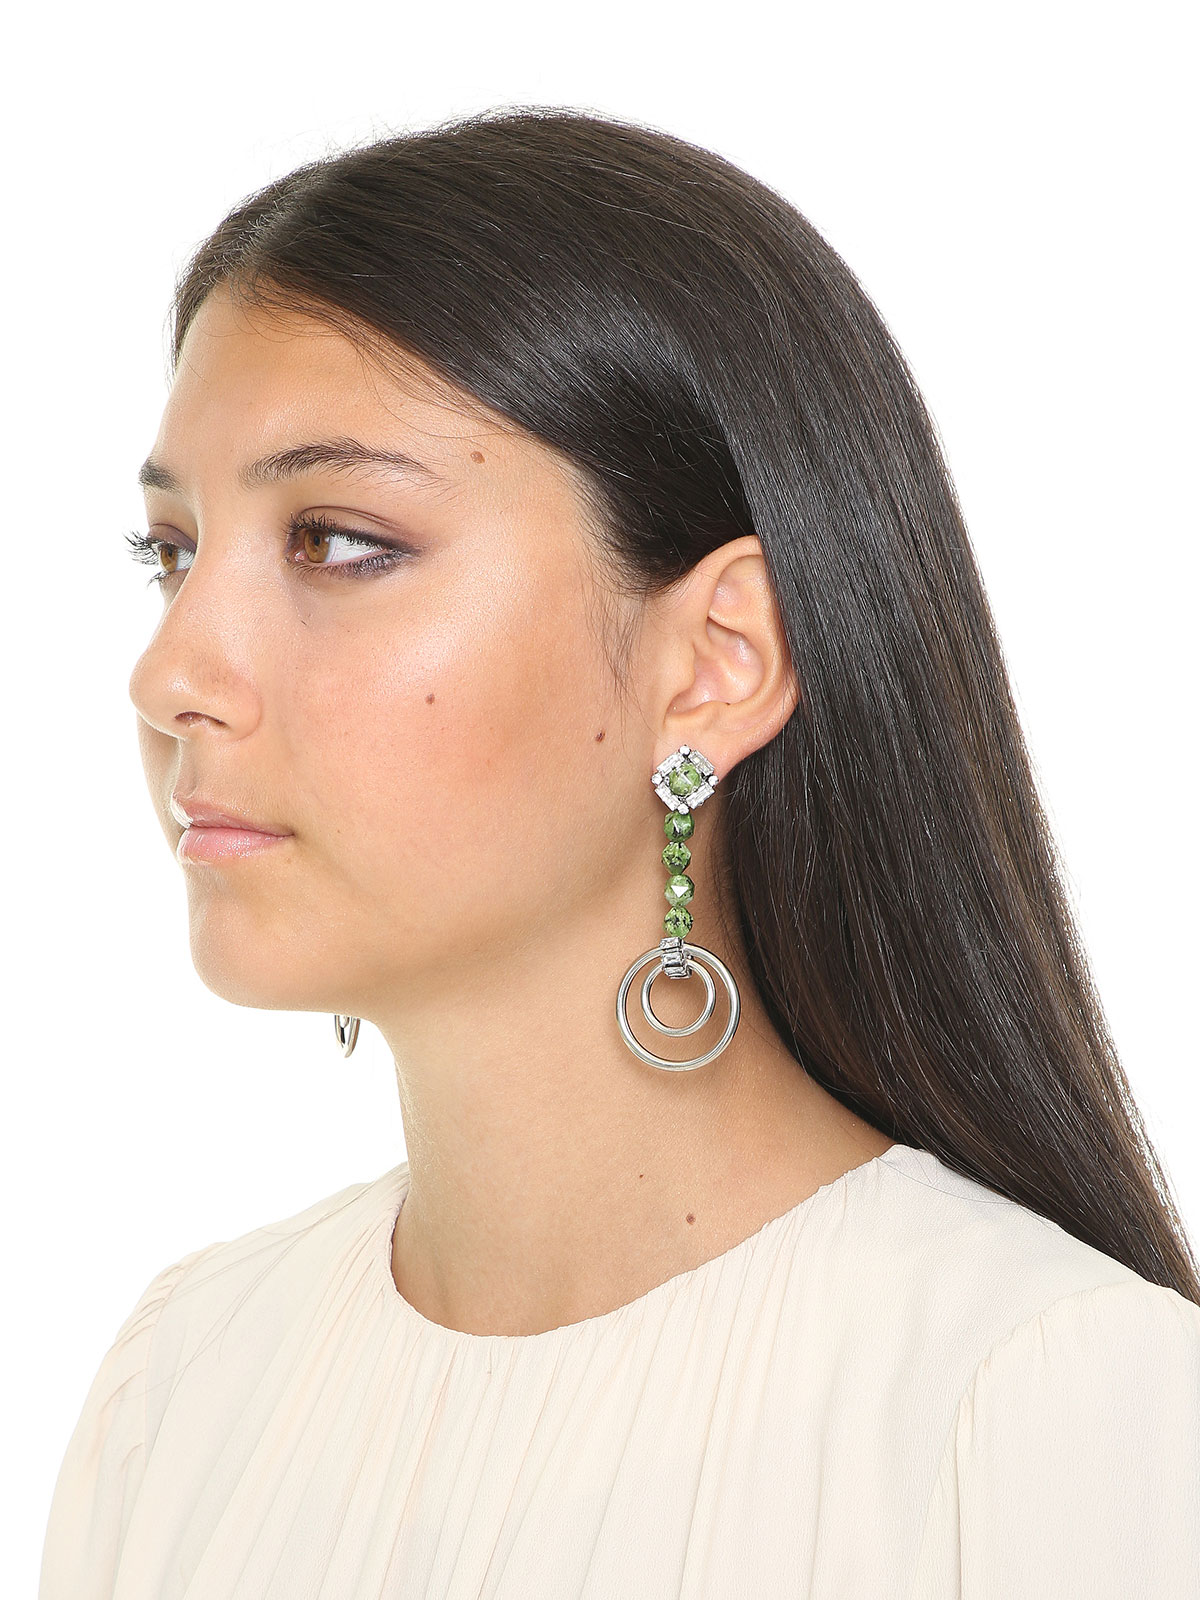 Labradorite stone earrings with antique silver hoops